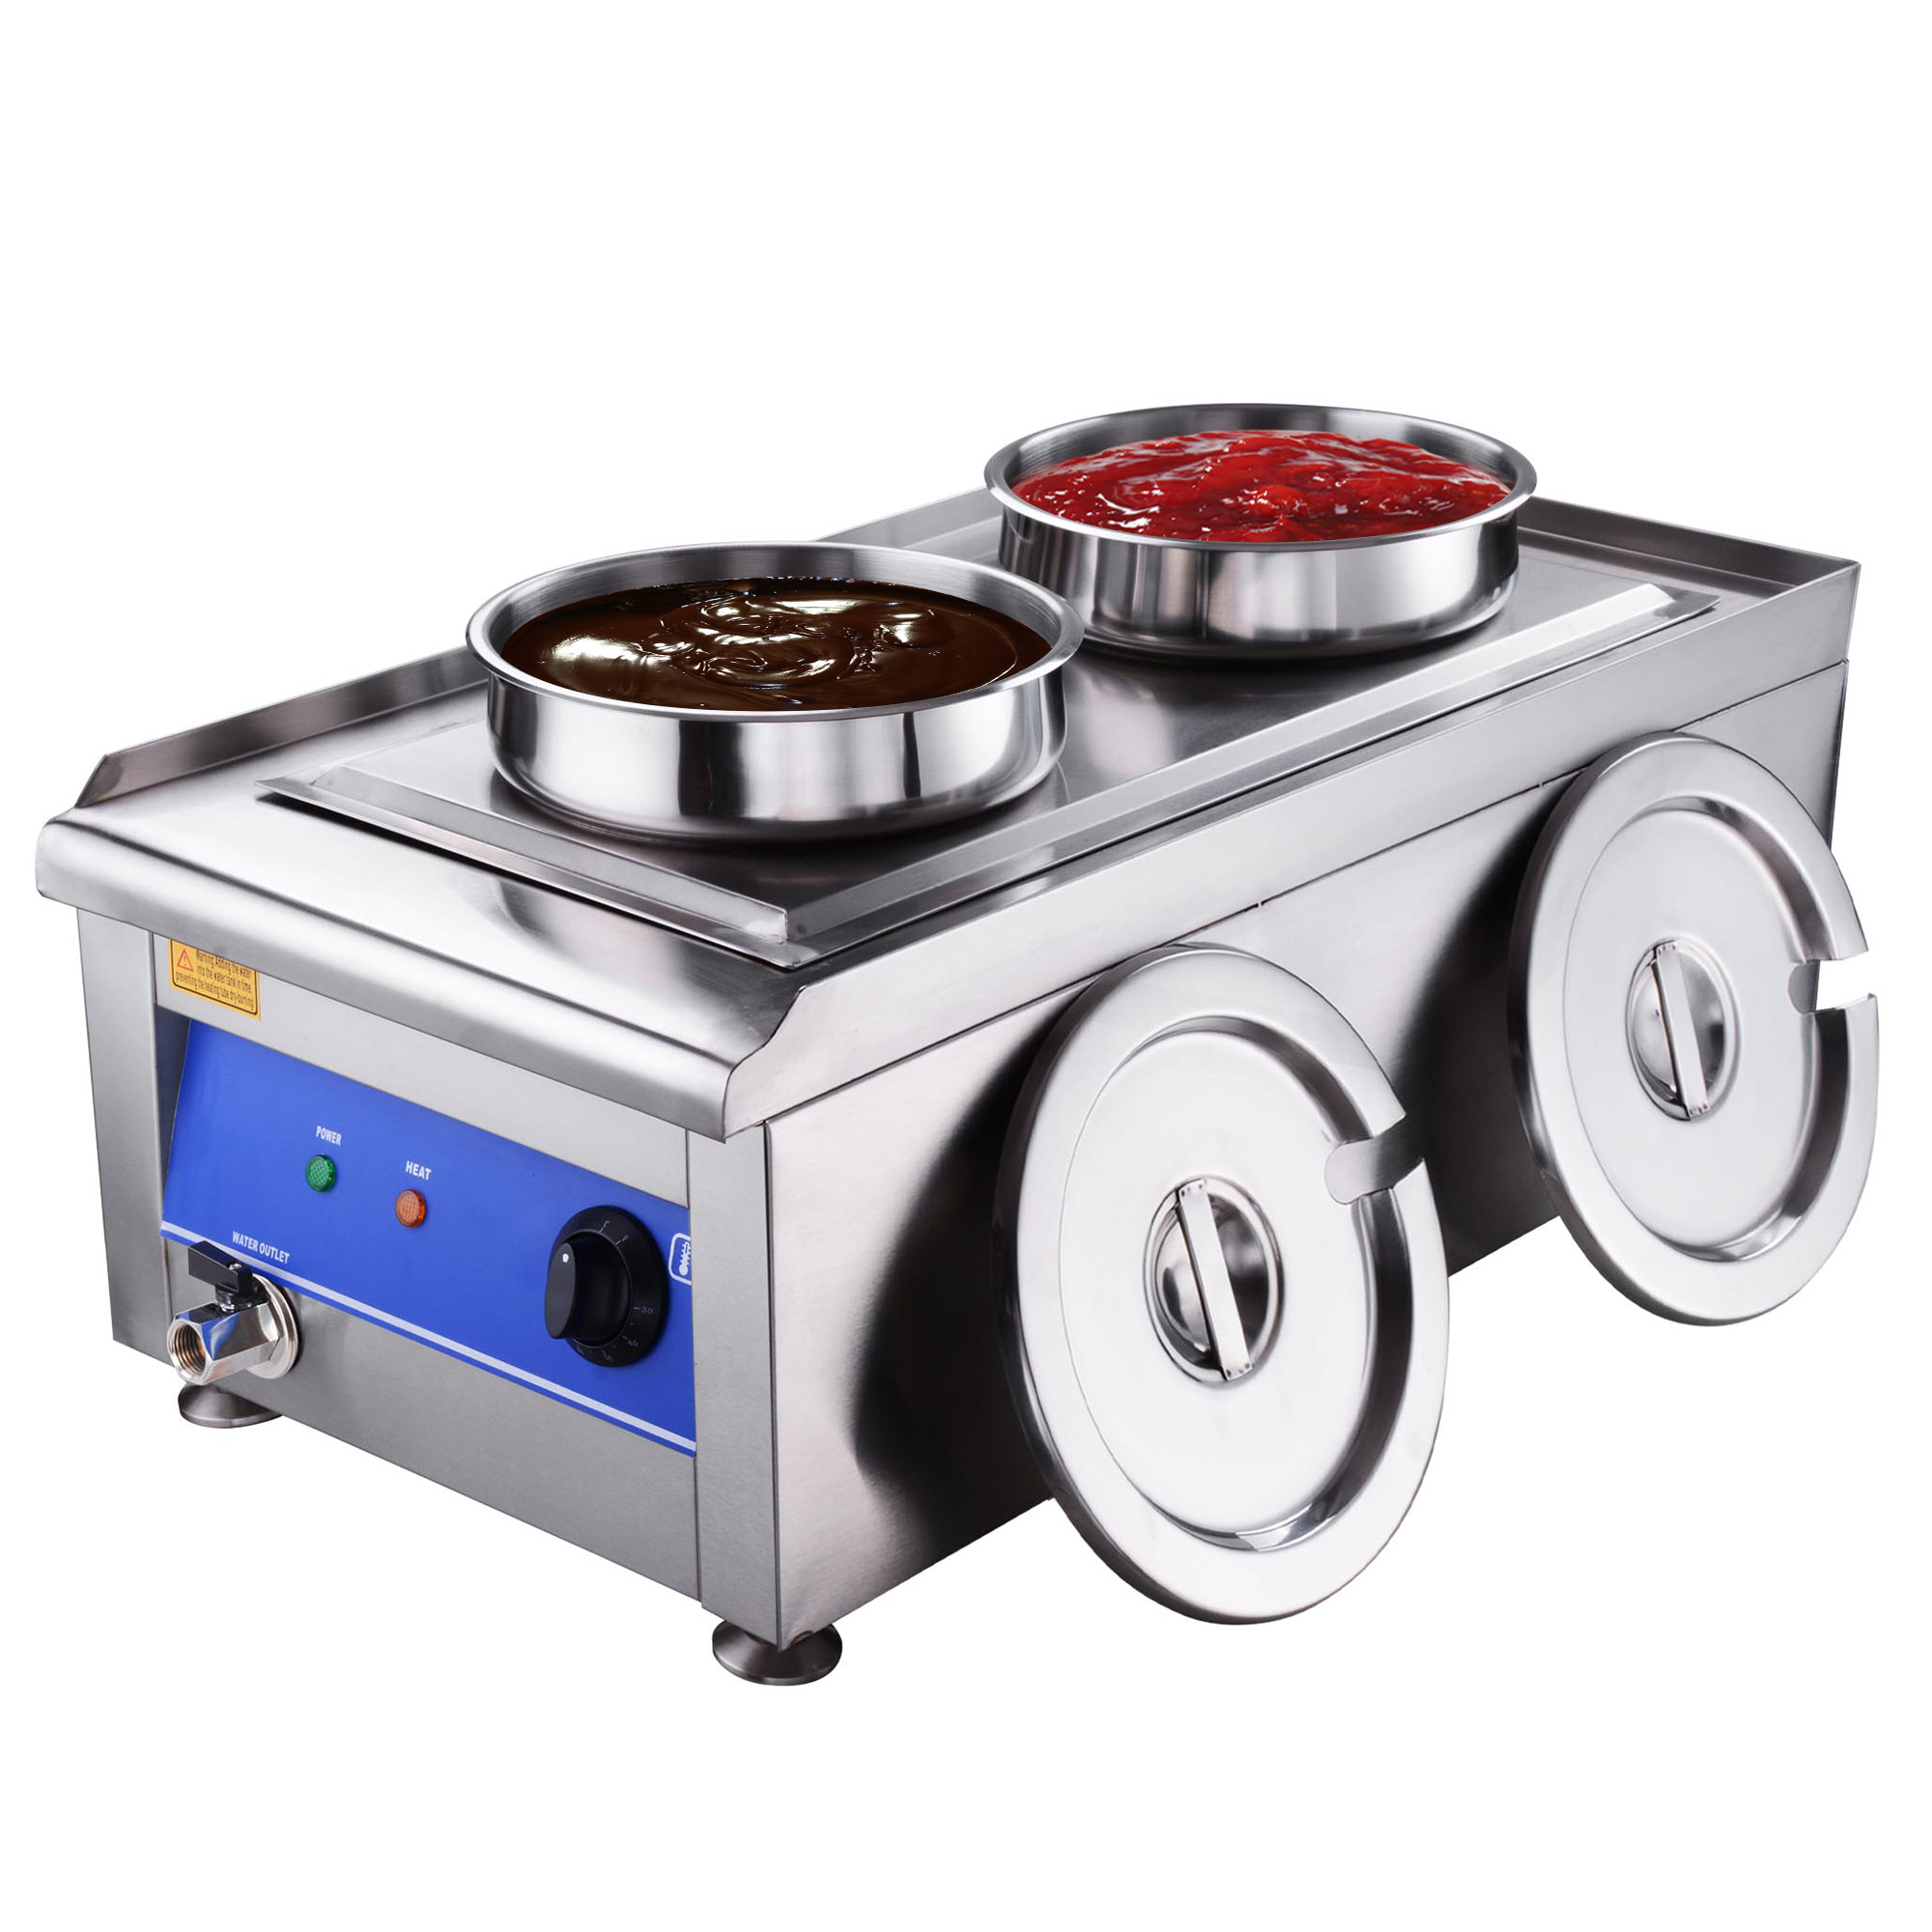 Yescom 1200W Dual Pots Countertop Food Warmer Stainless Steel Commercial Bain Marie